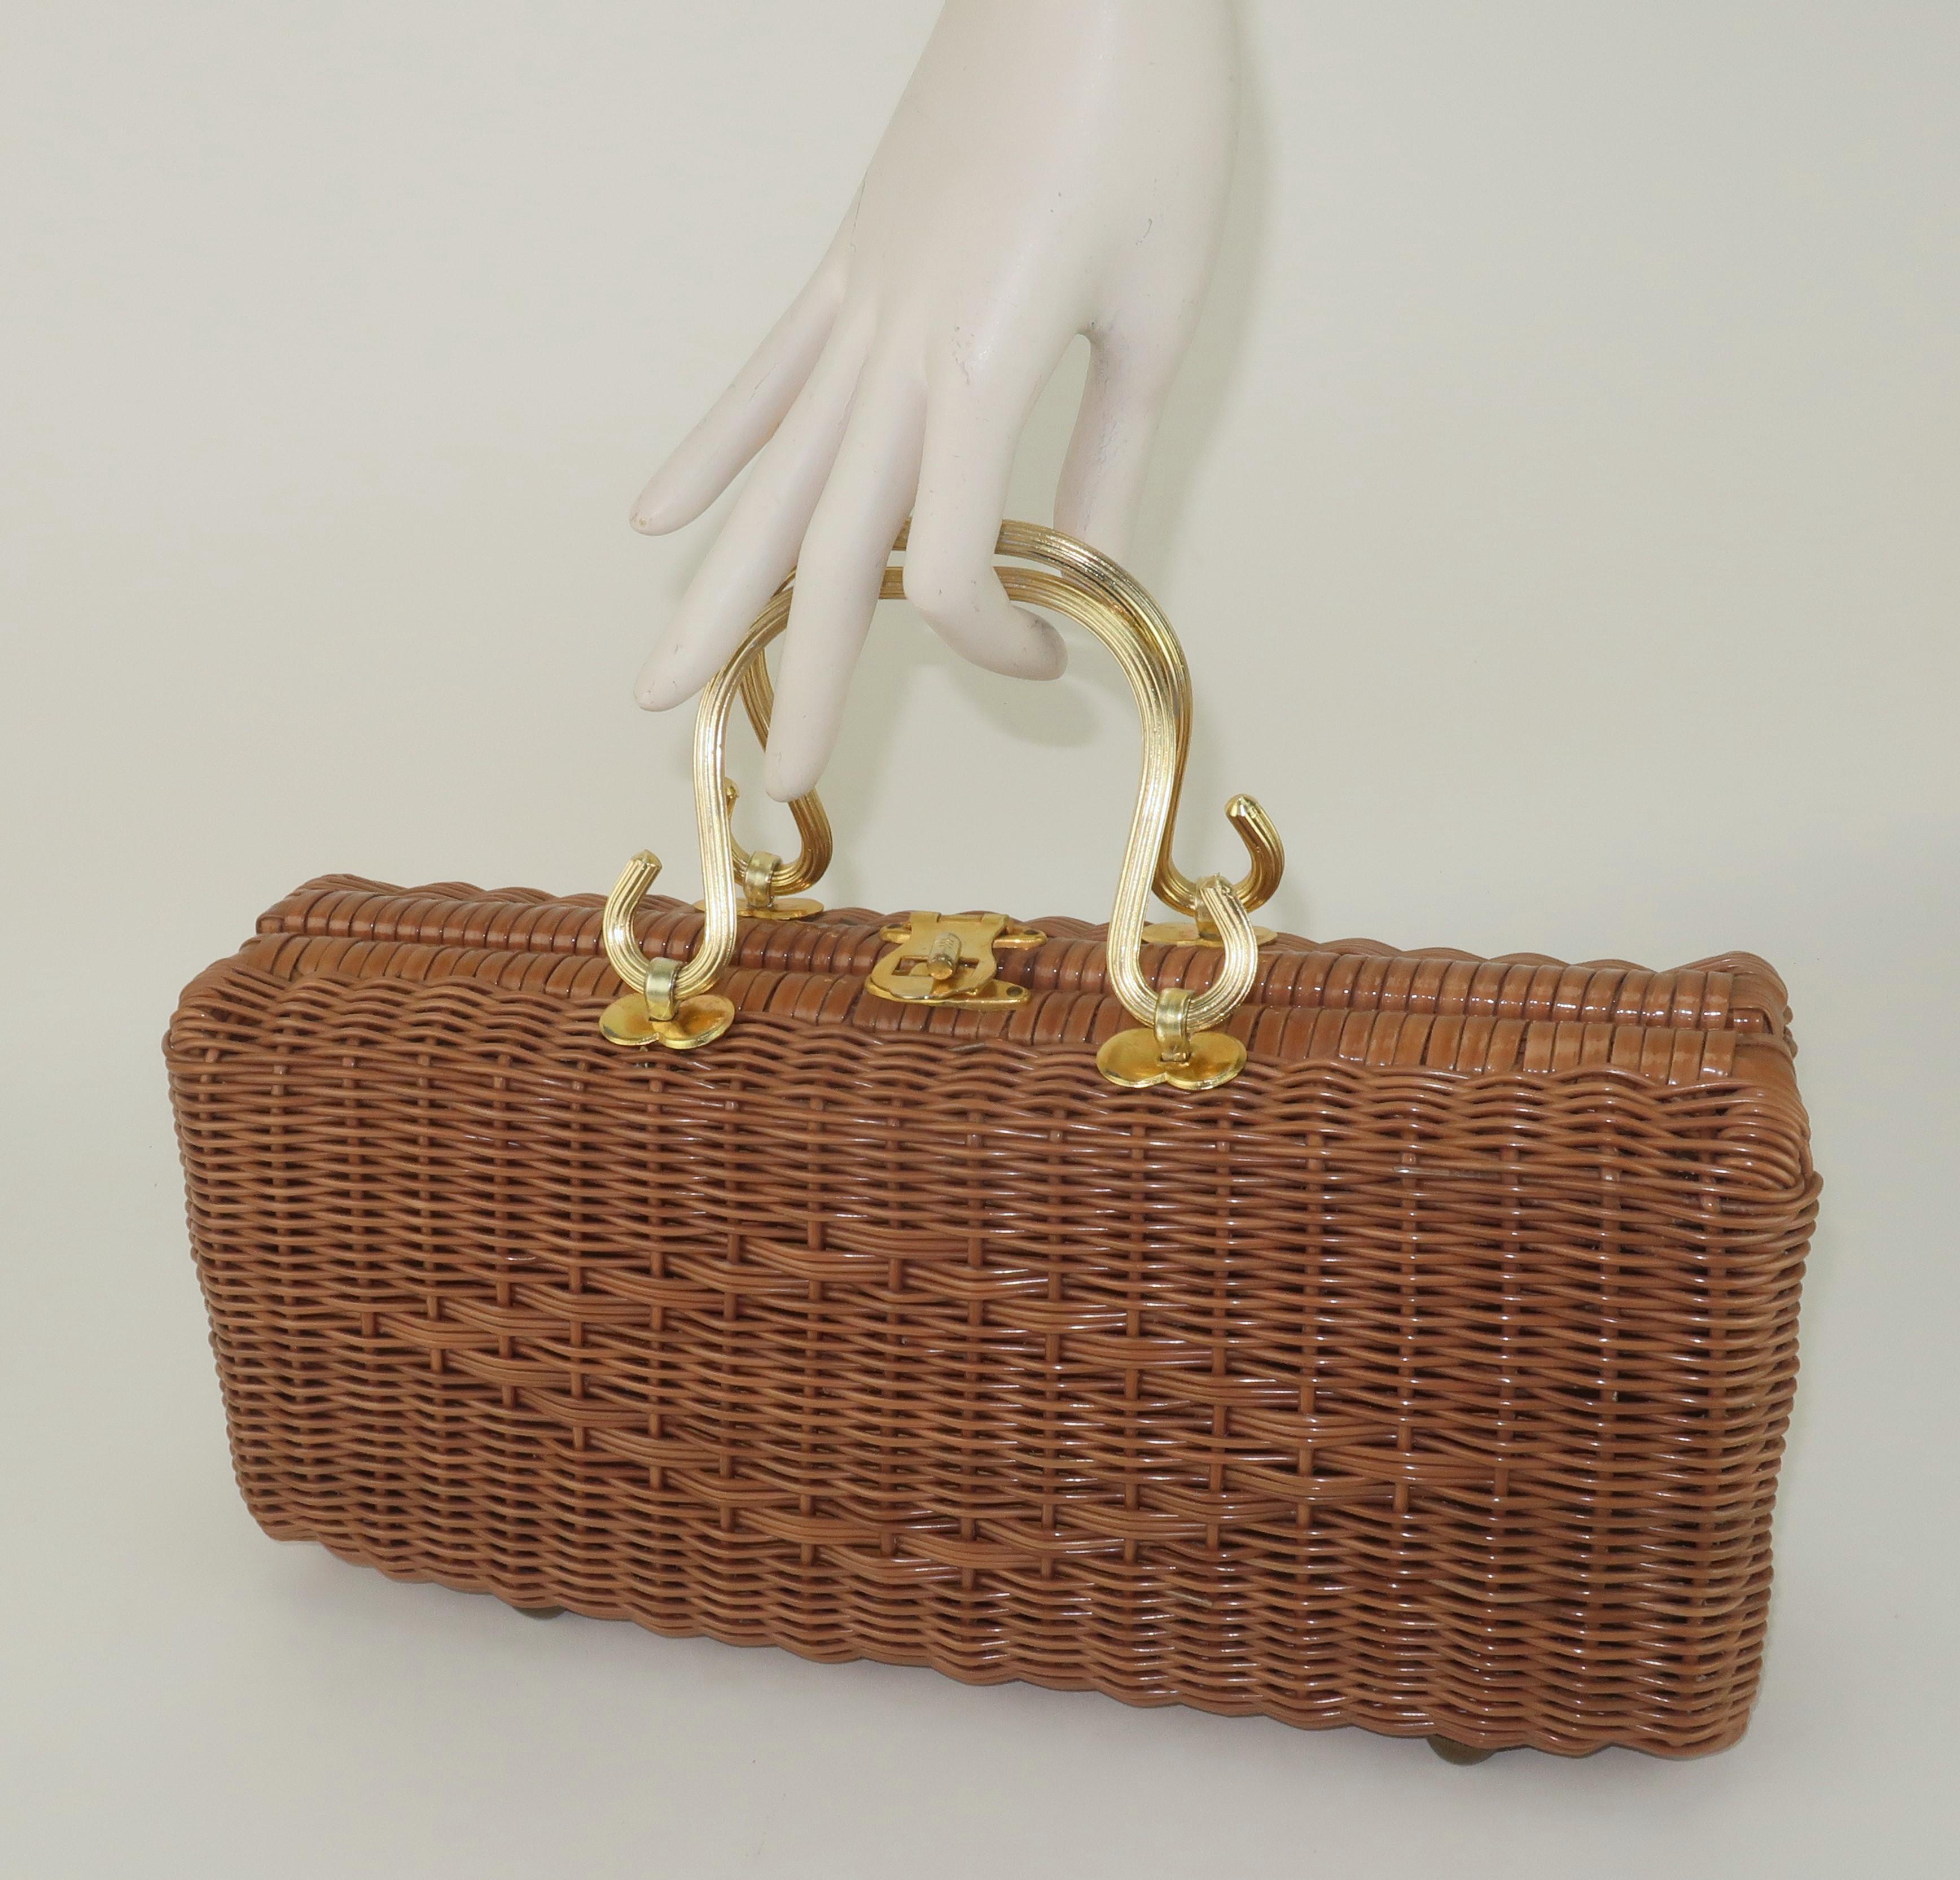 Elongated Straw Handbag With Gold Handles, 1960's For Sale 7